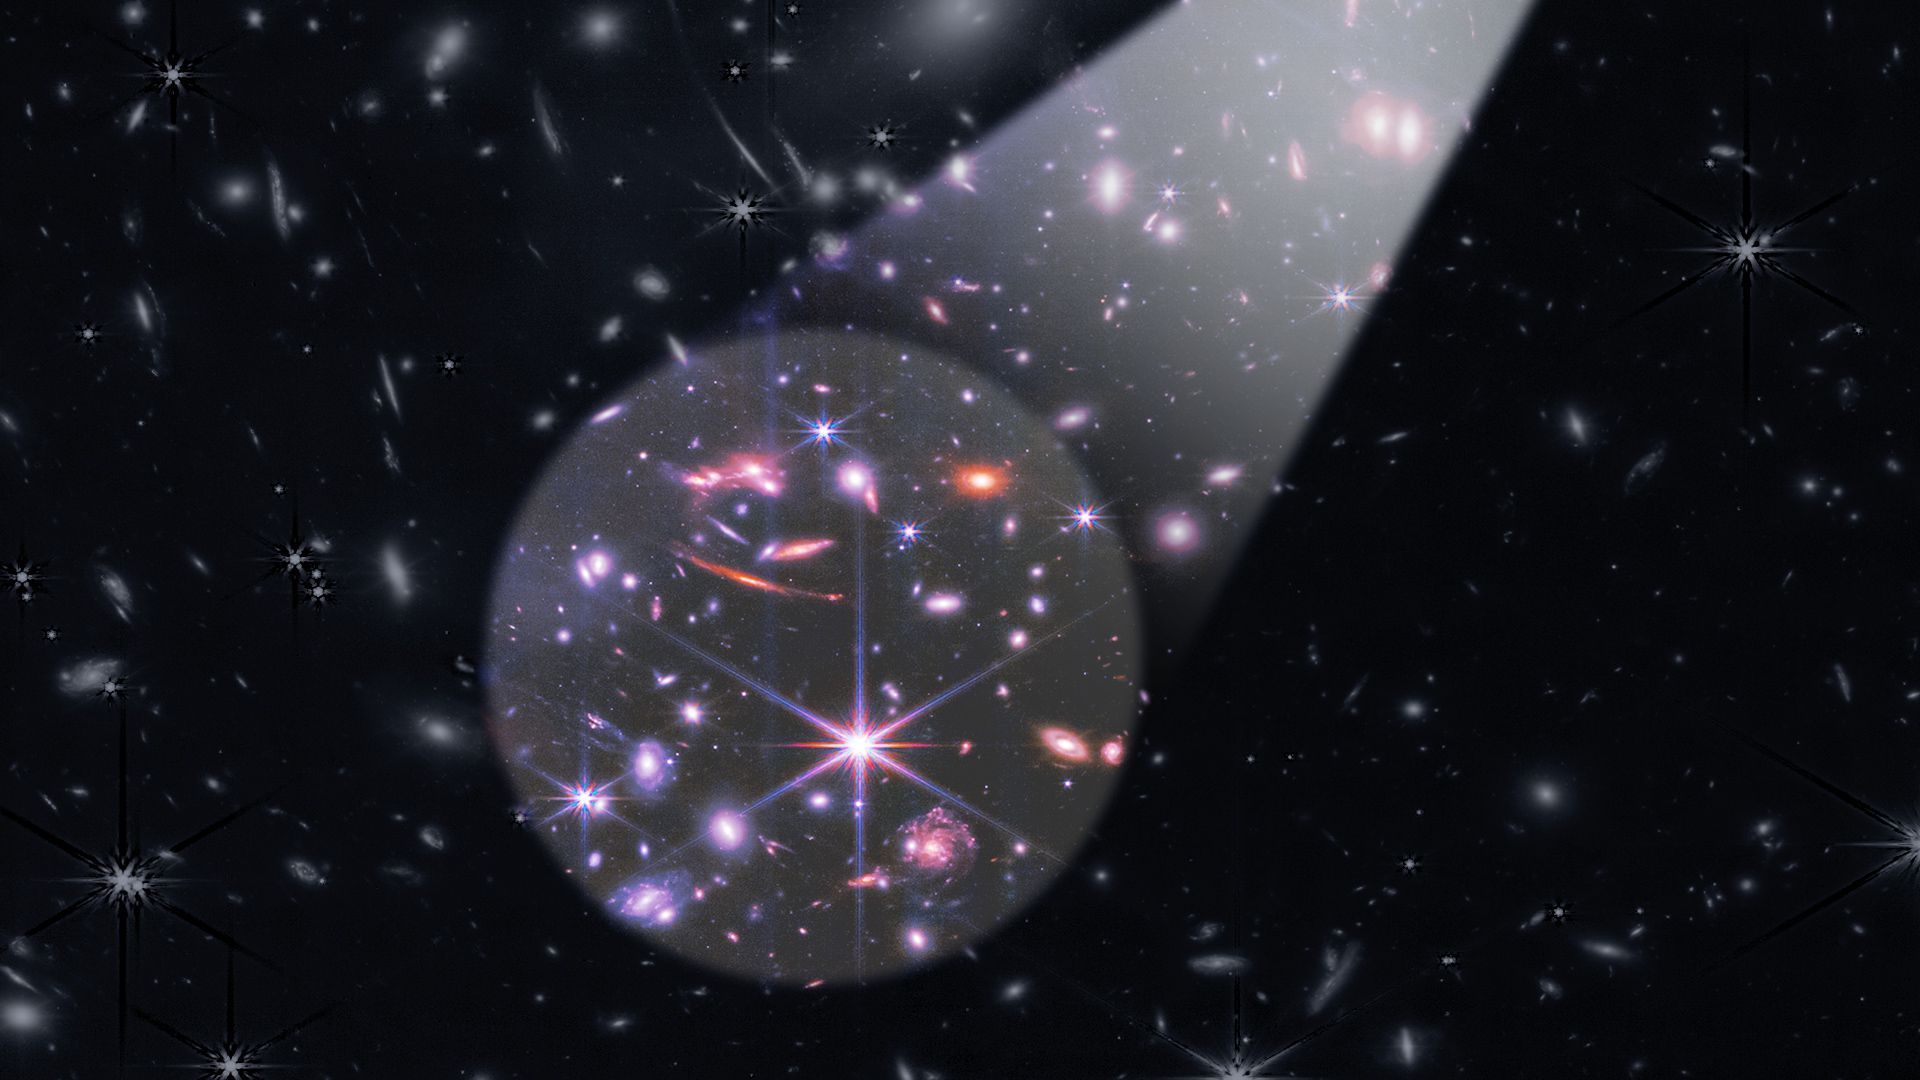 Photo illustration of a black and whtie galaxy with a spotlight revealing a brightly colored area. 